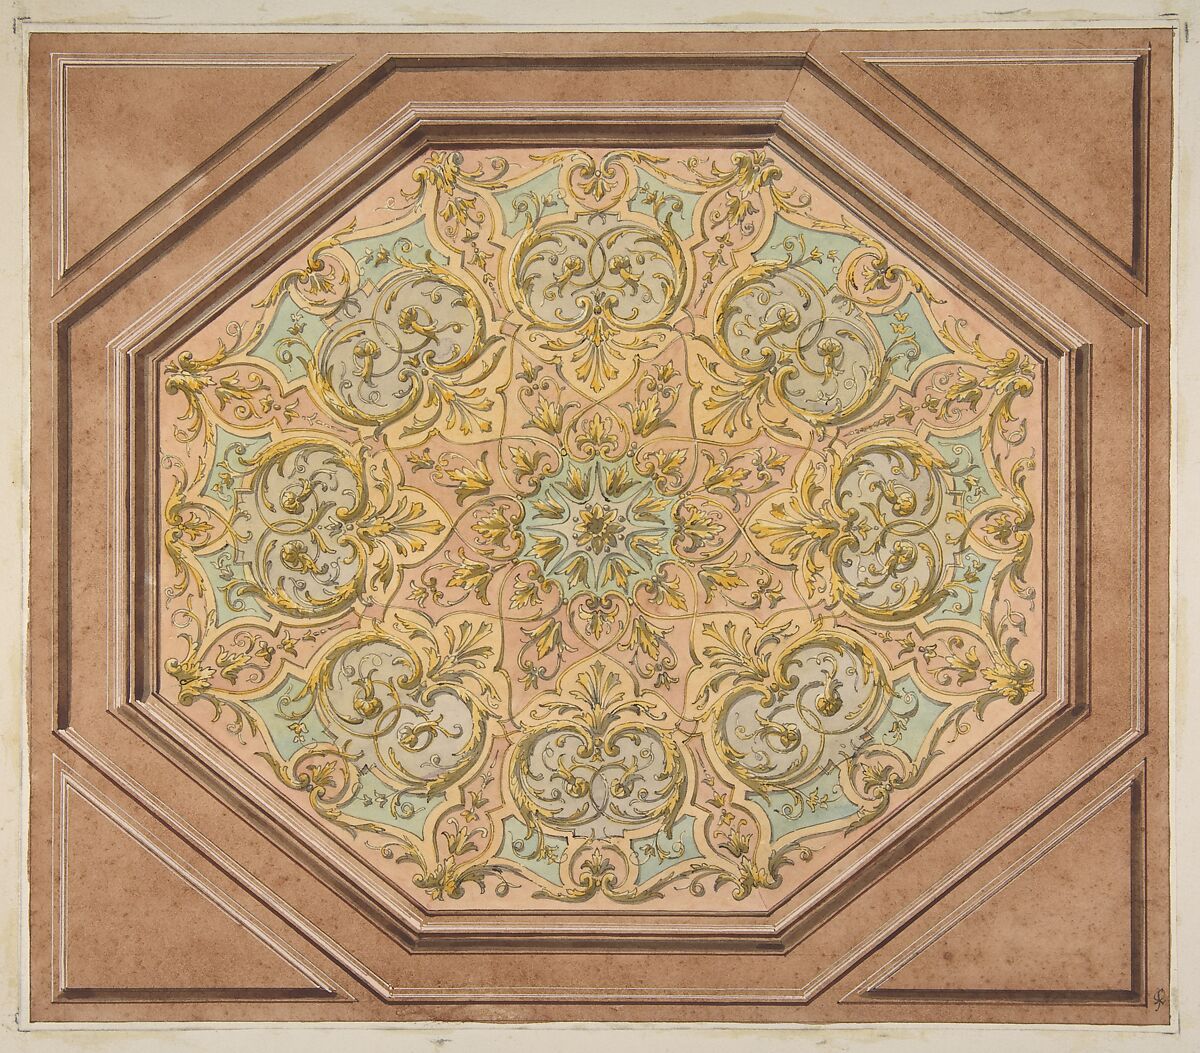 Design for the decoration of a hexagonal ceiling with rinceaux, Jules-Edmond-Charles Lachaise (French, died 1897), pen and ink and watercolor on wove paper; mounted on wove paper 